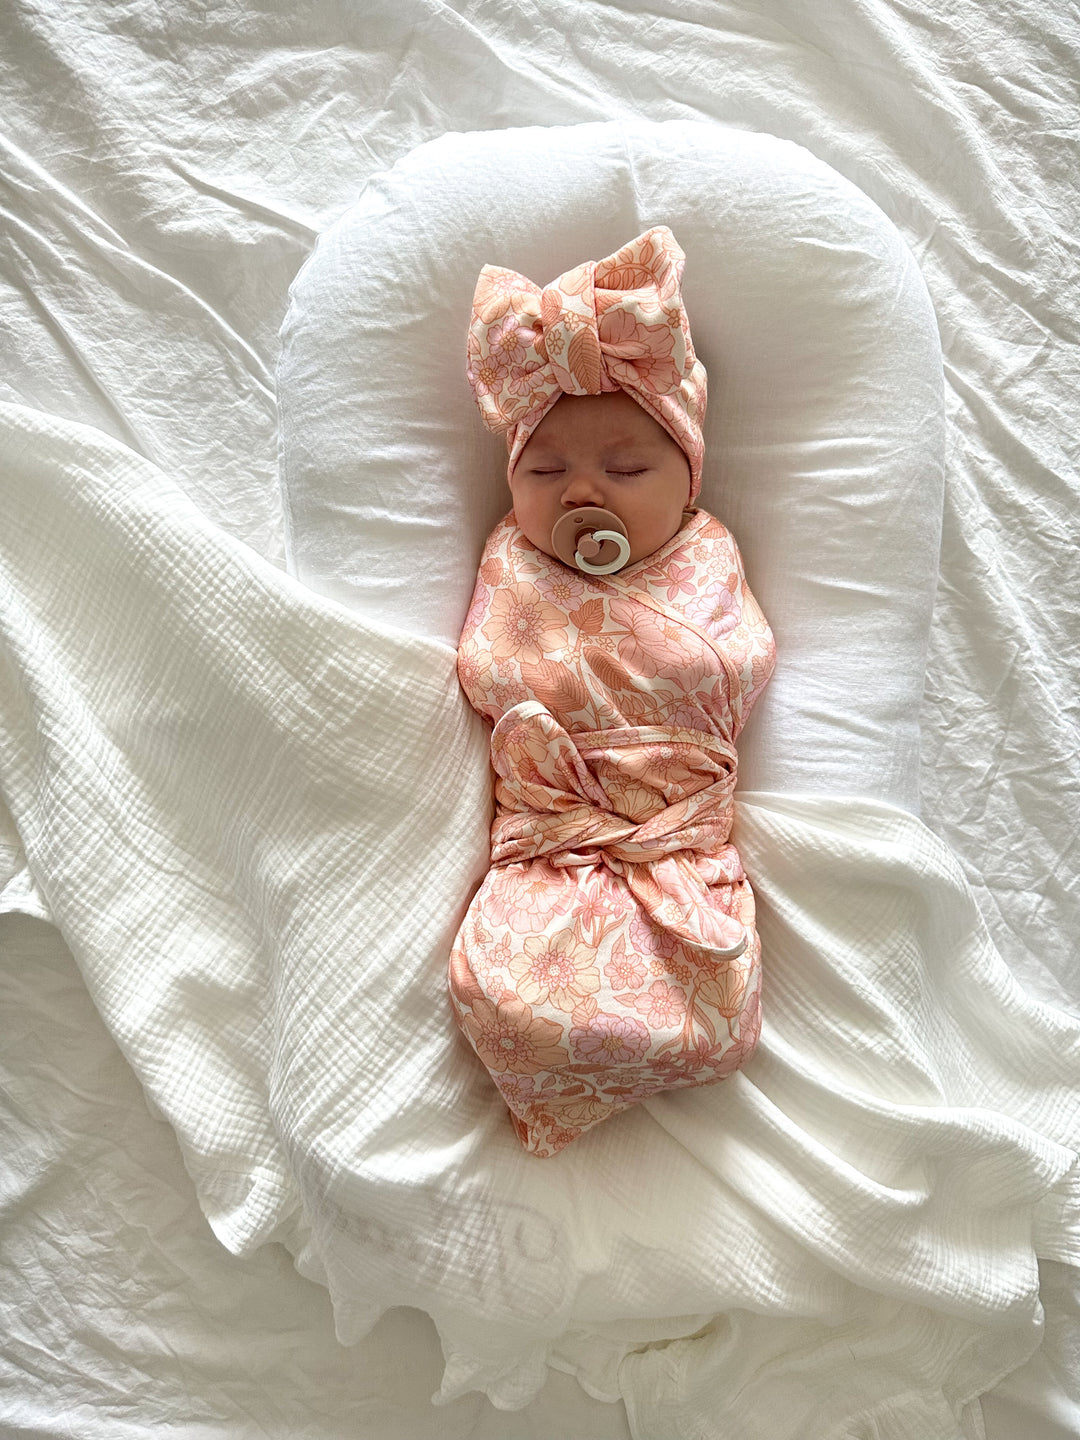 Matching Bows, Swaddles + Beddiing